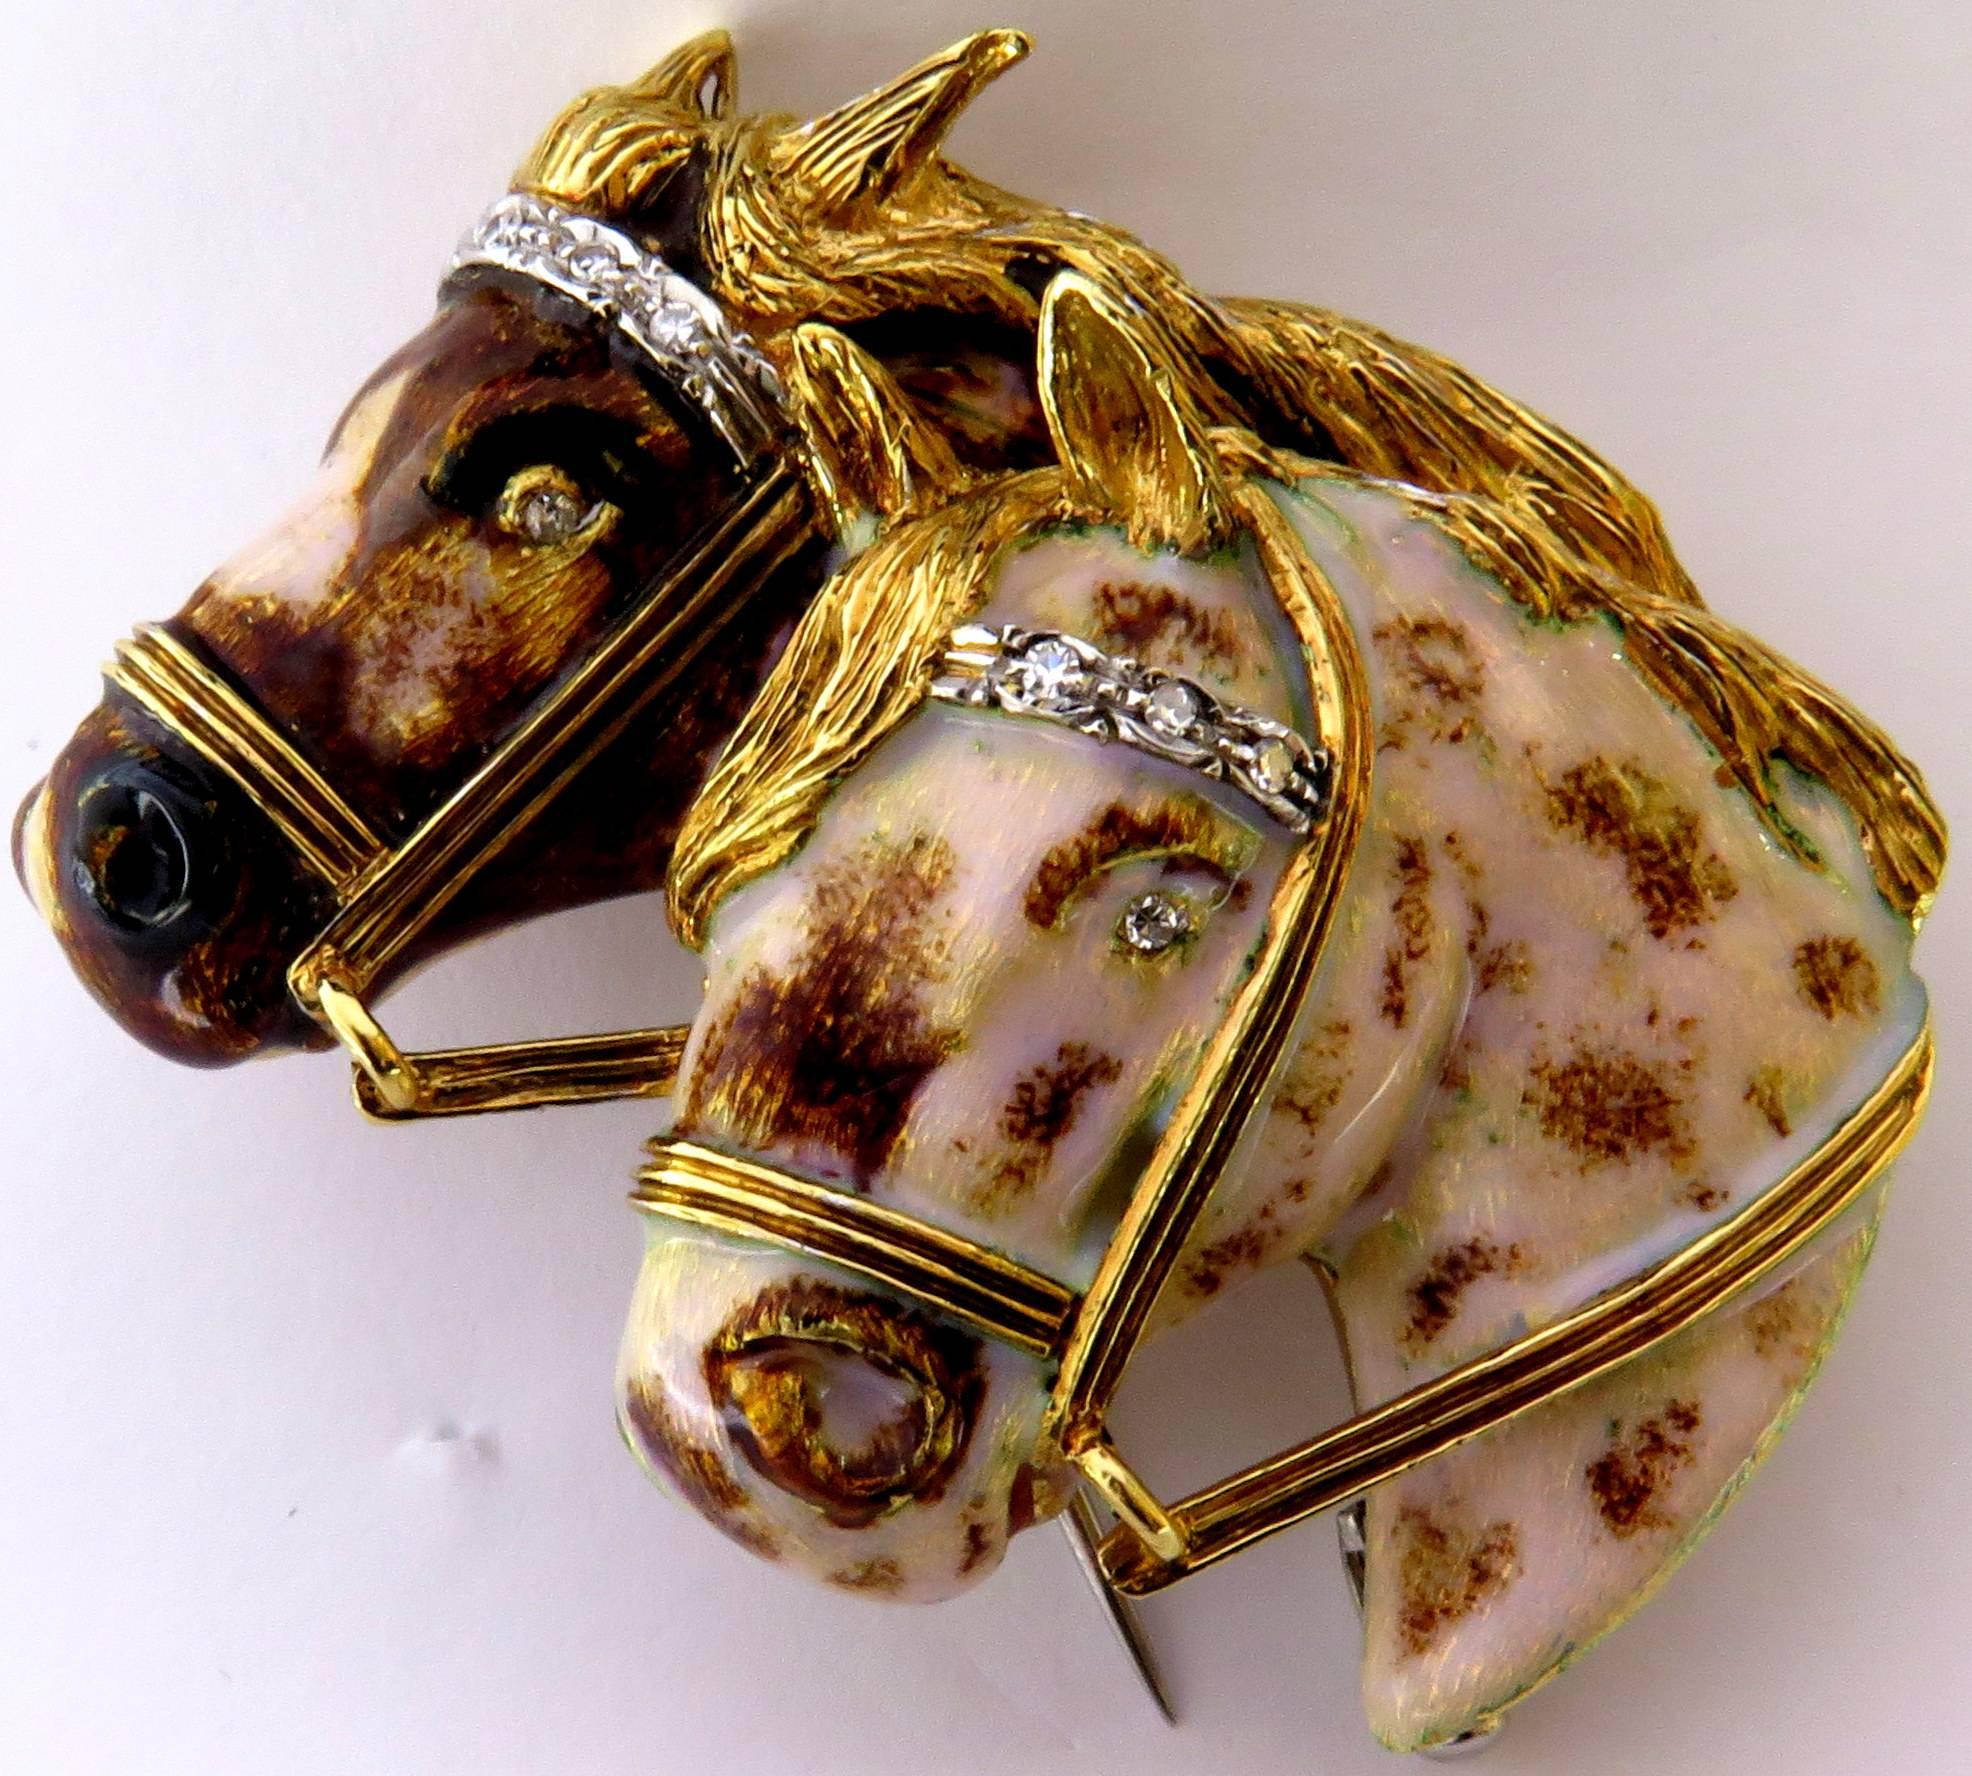 This 18k gold dynamic horse pin duo has incredible personality. The enamel on these two spotted horses just adds so much dimension. Each horse has a diamond eye and diamond accents on their bridles. 
This pin weighs 24.1 grams
This pin measures 2